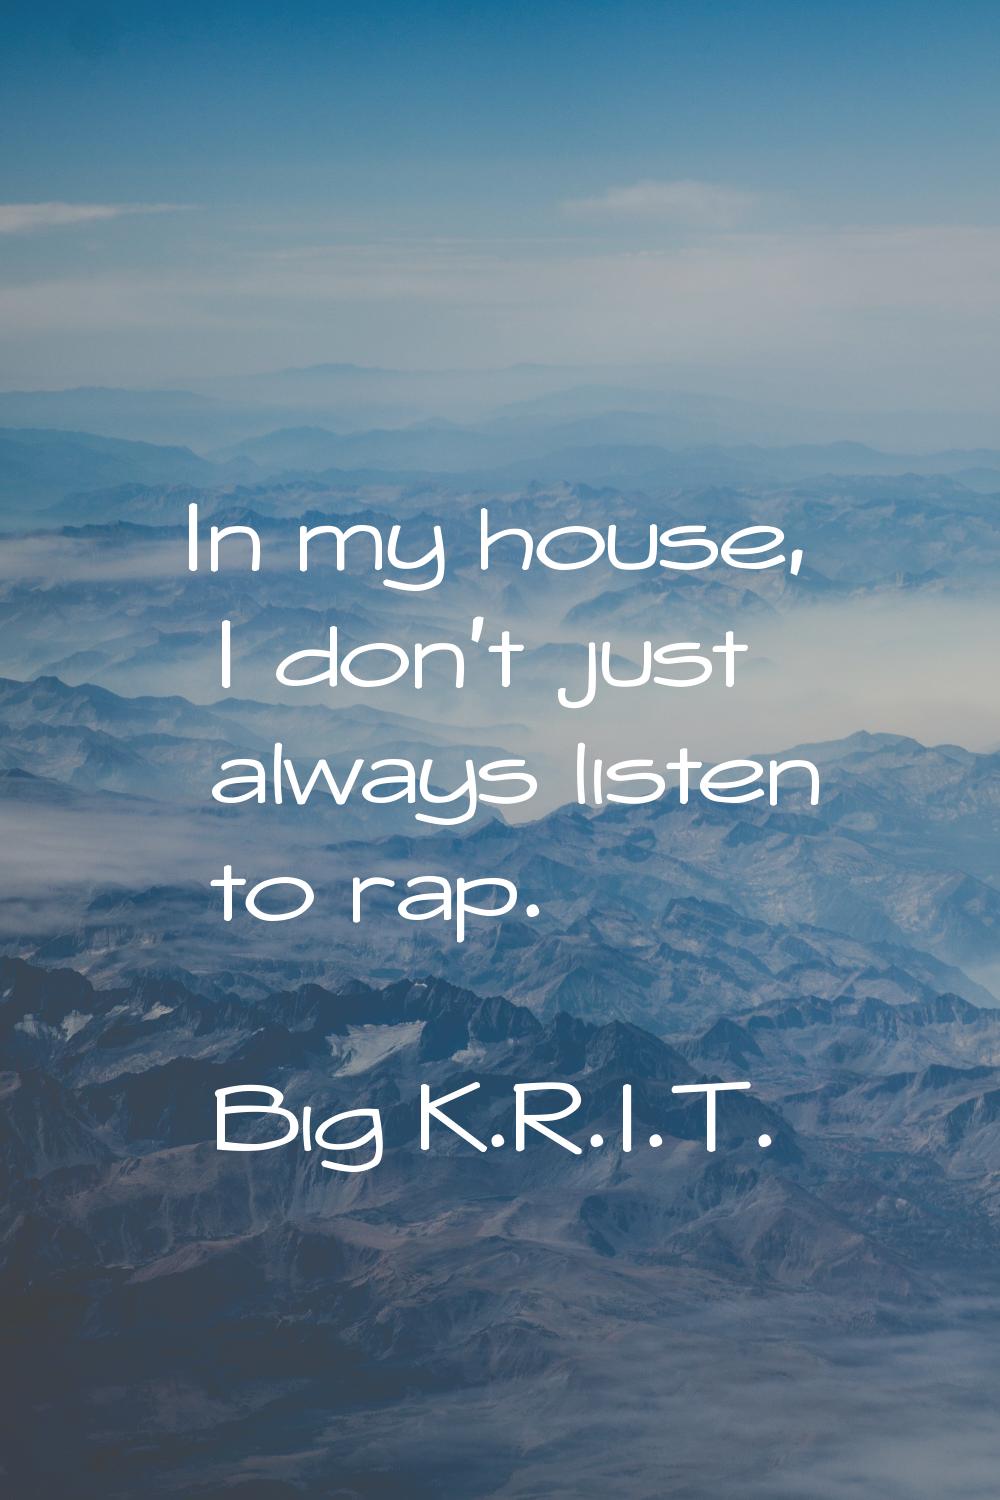 In my house, I don't just always listen to rap.